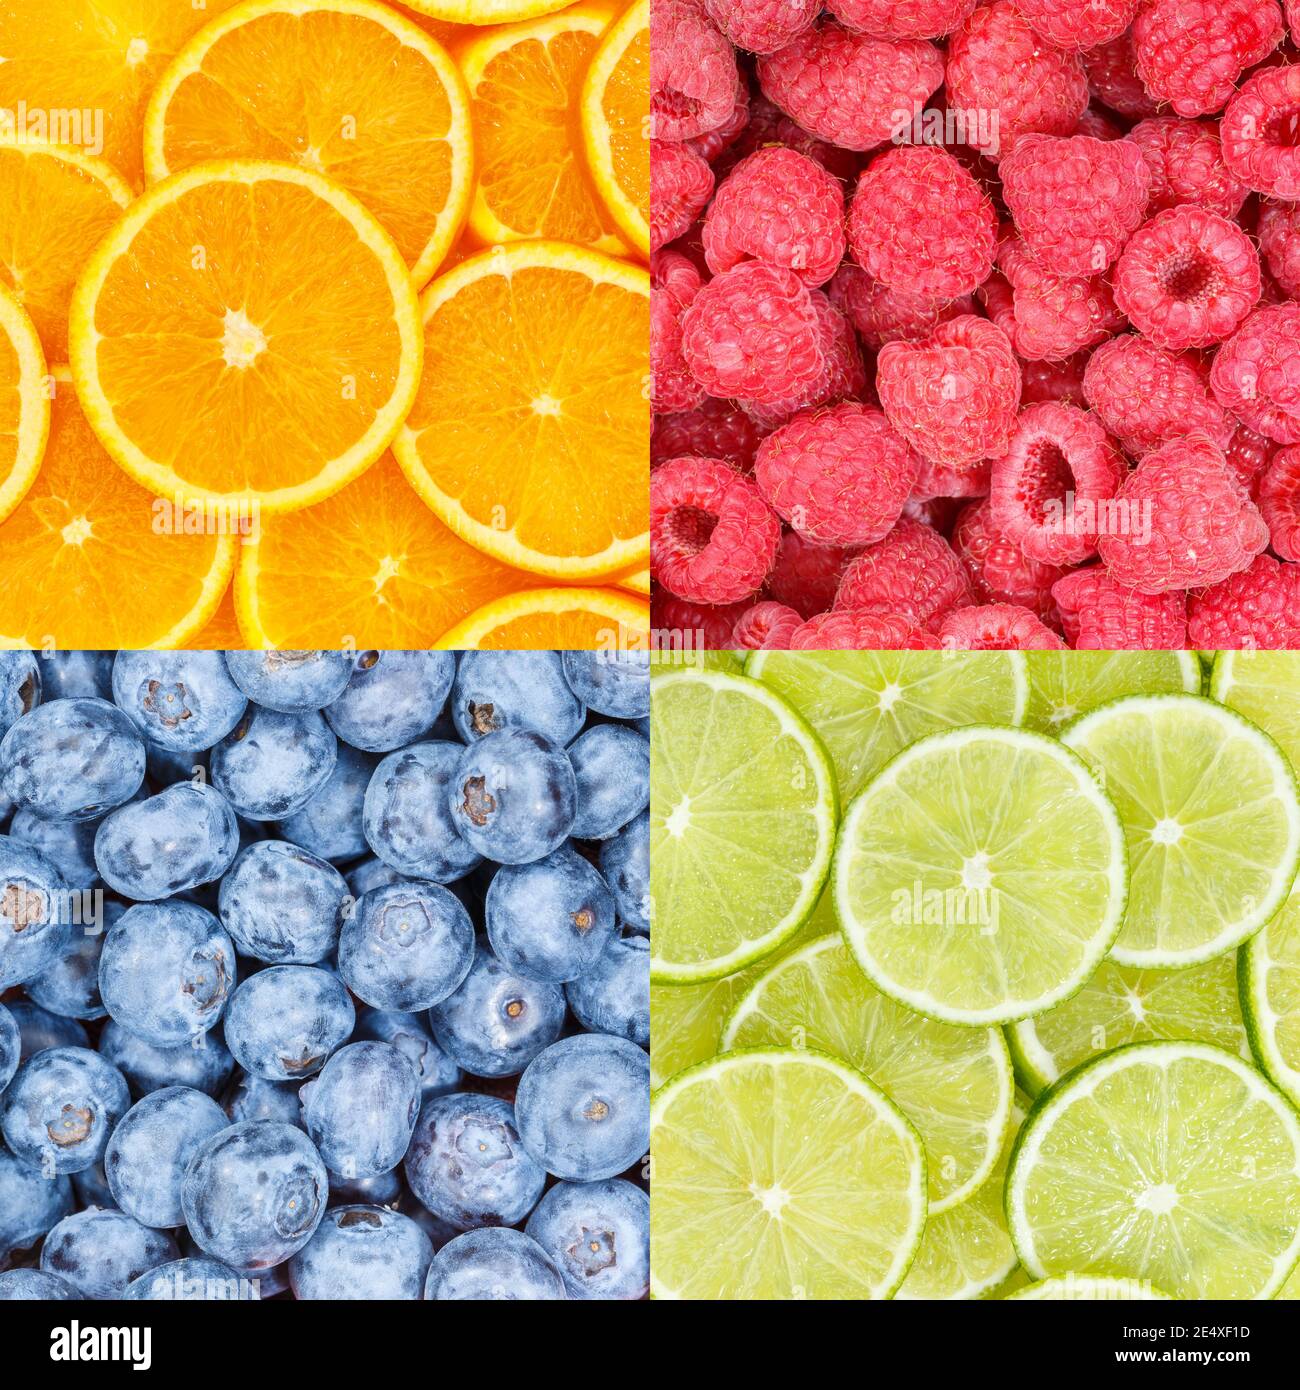 Berry fruits oranges berries fruit food background collection collage set square backgrounds Stock Photo